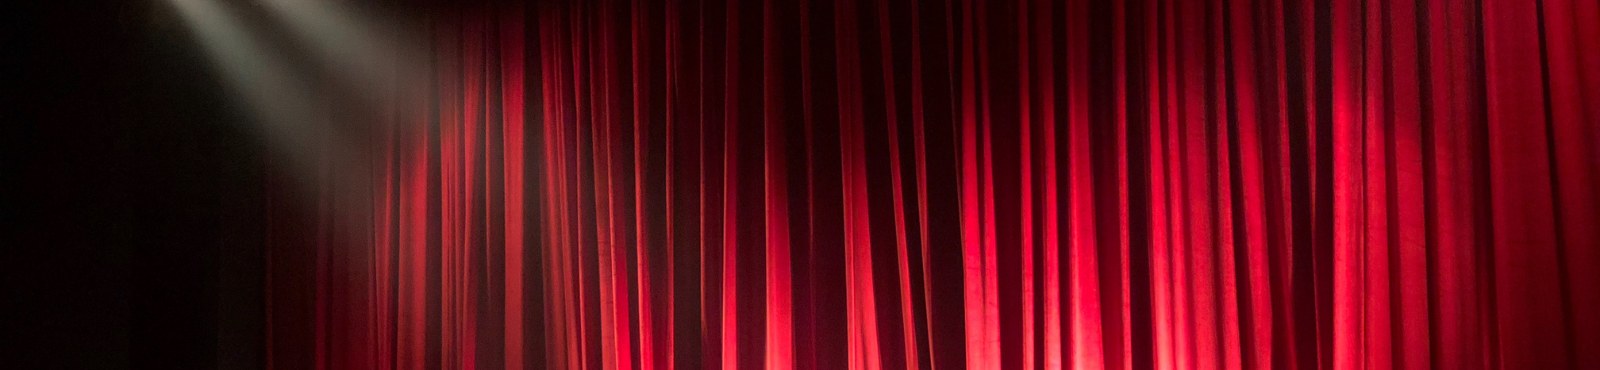 Theater Curtains Background Image